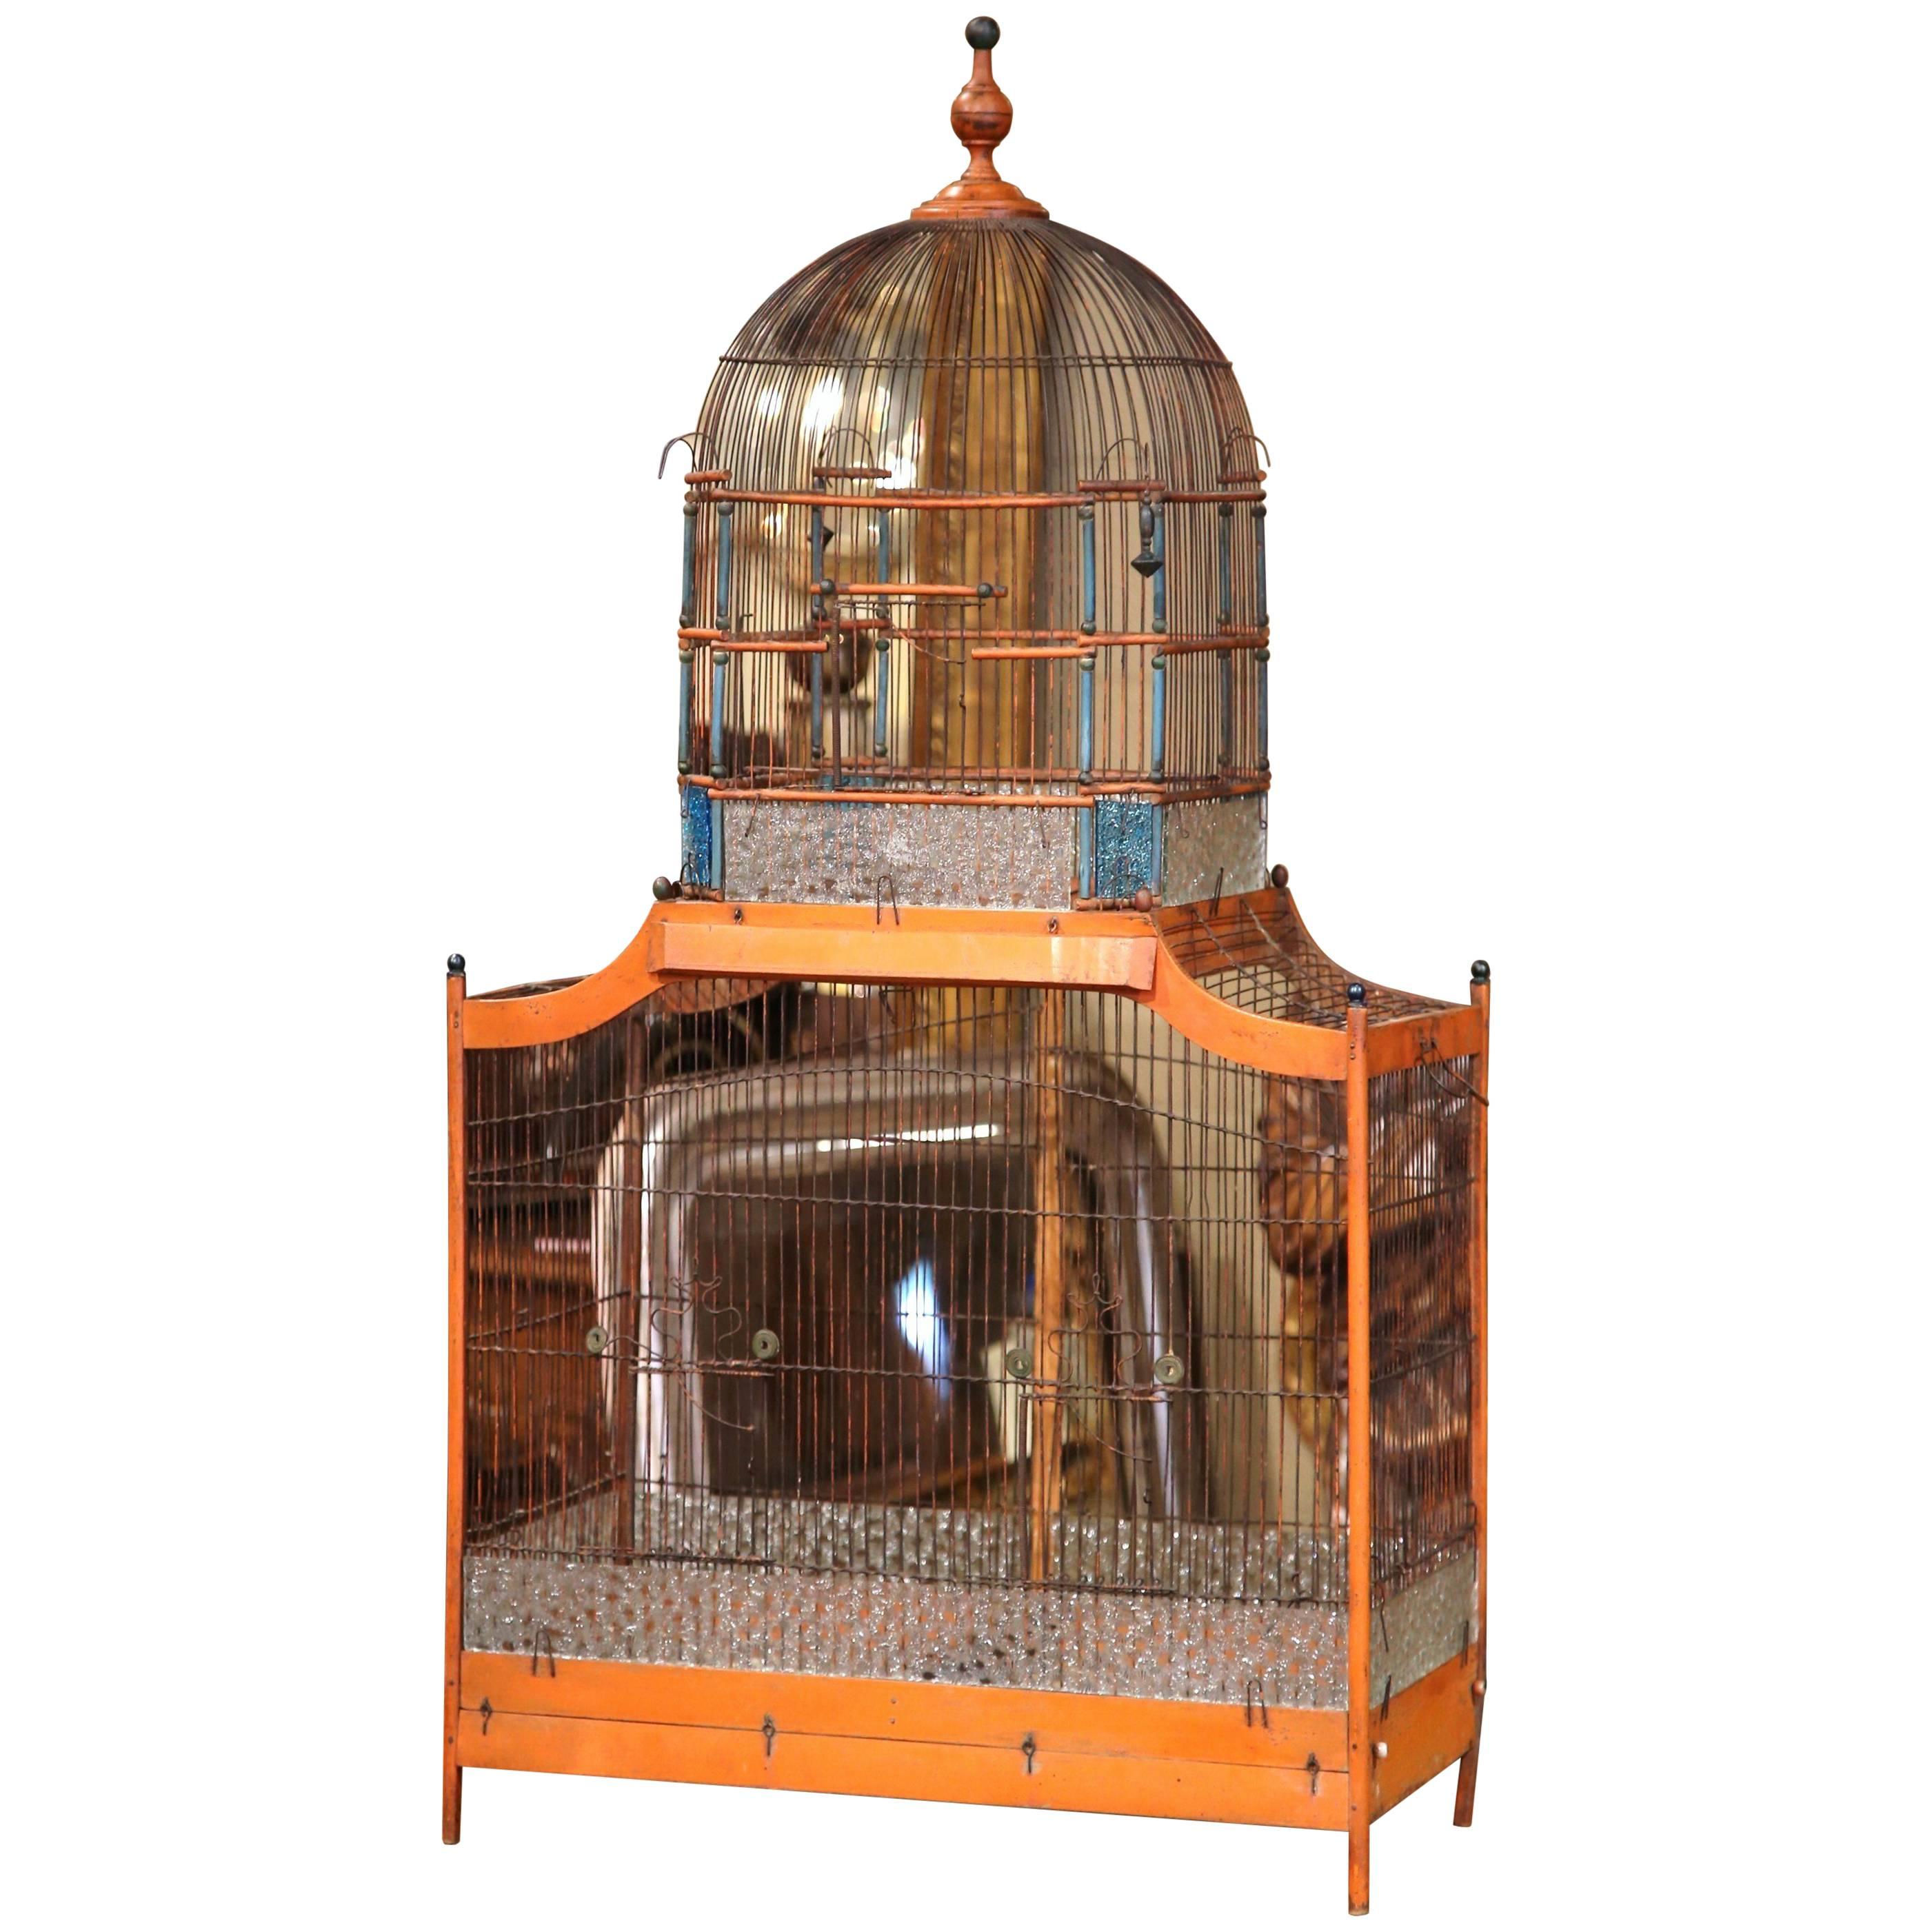 Large 19th Century French Hand-Painted Carved and Wired Birdcage with Dome Top